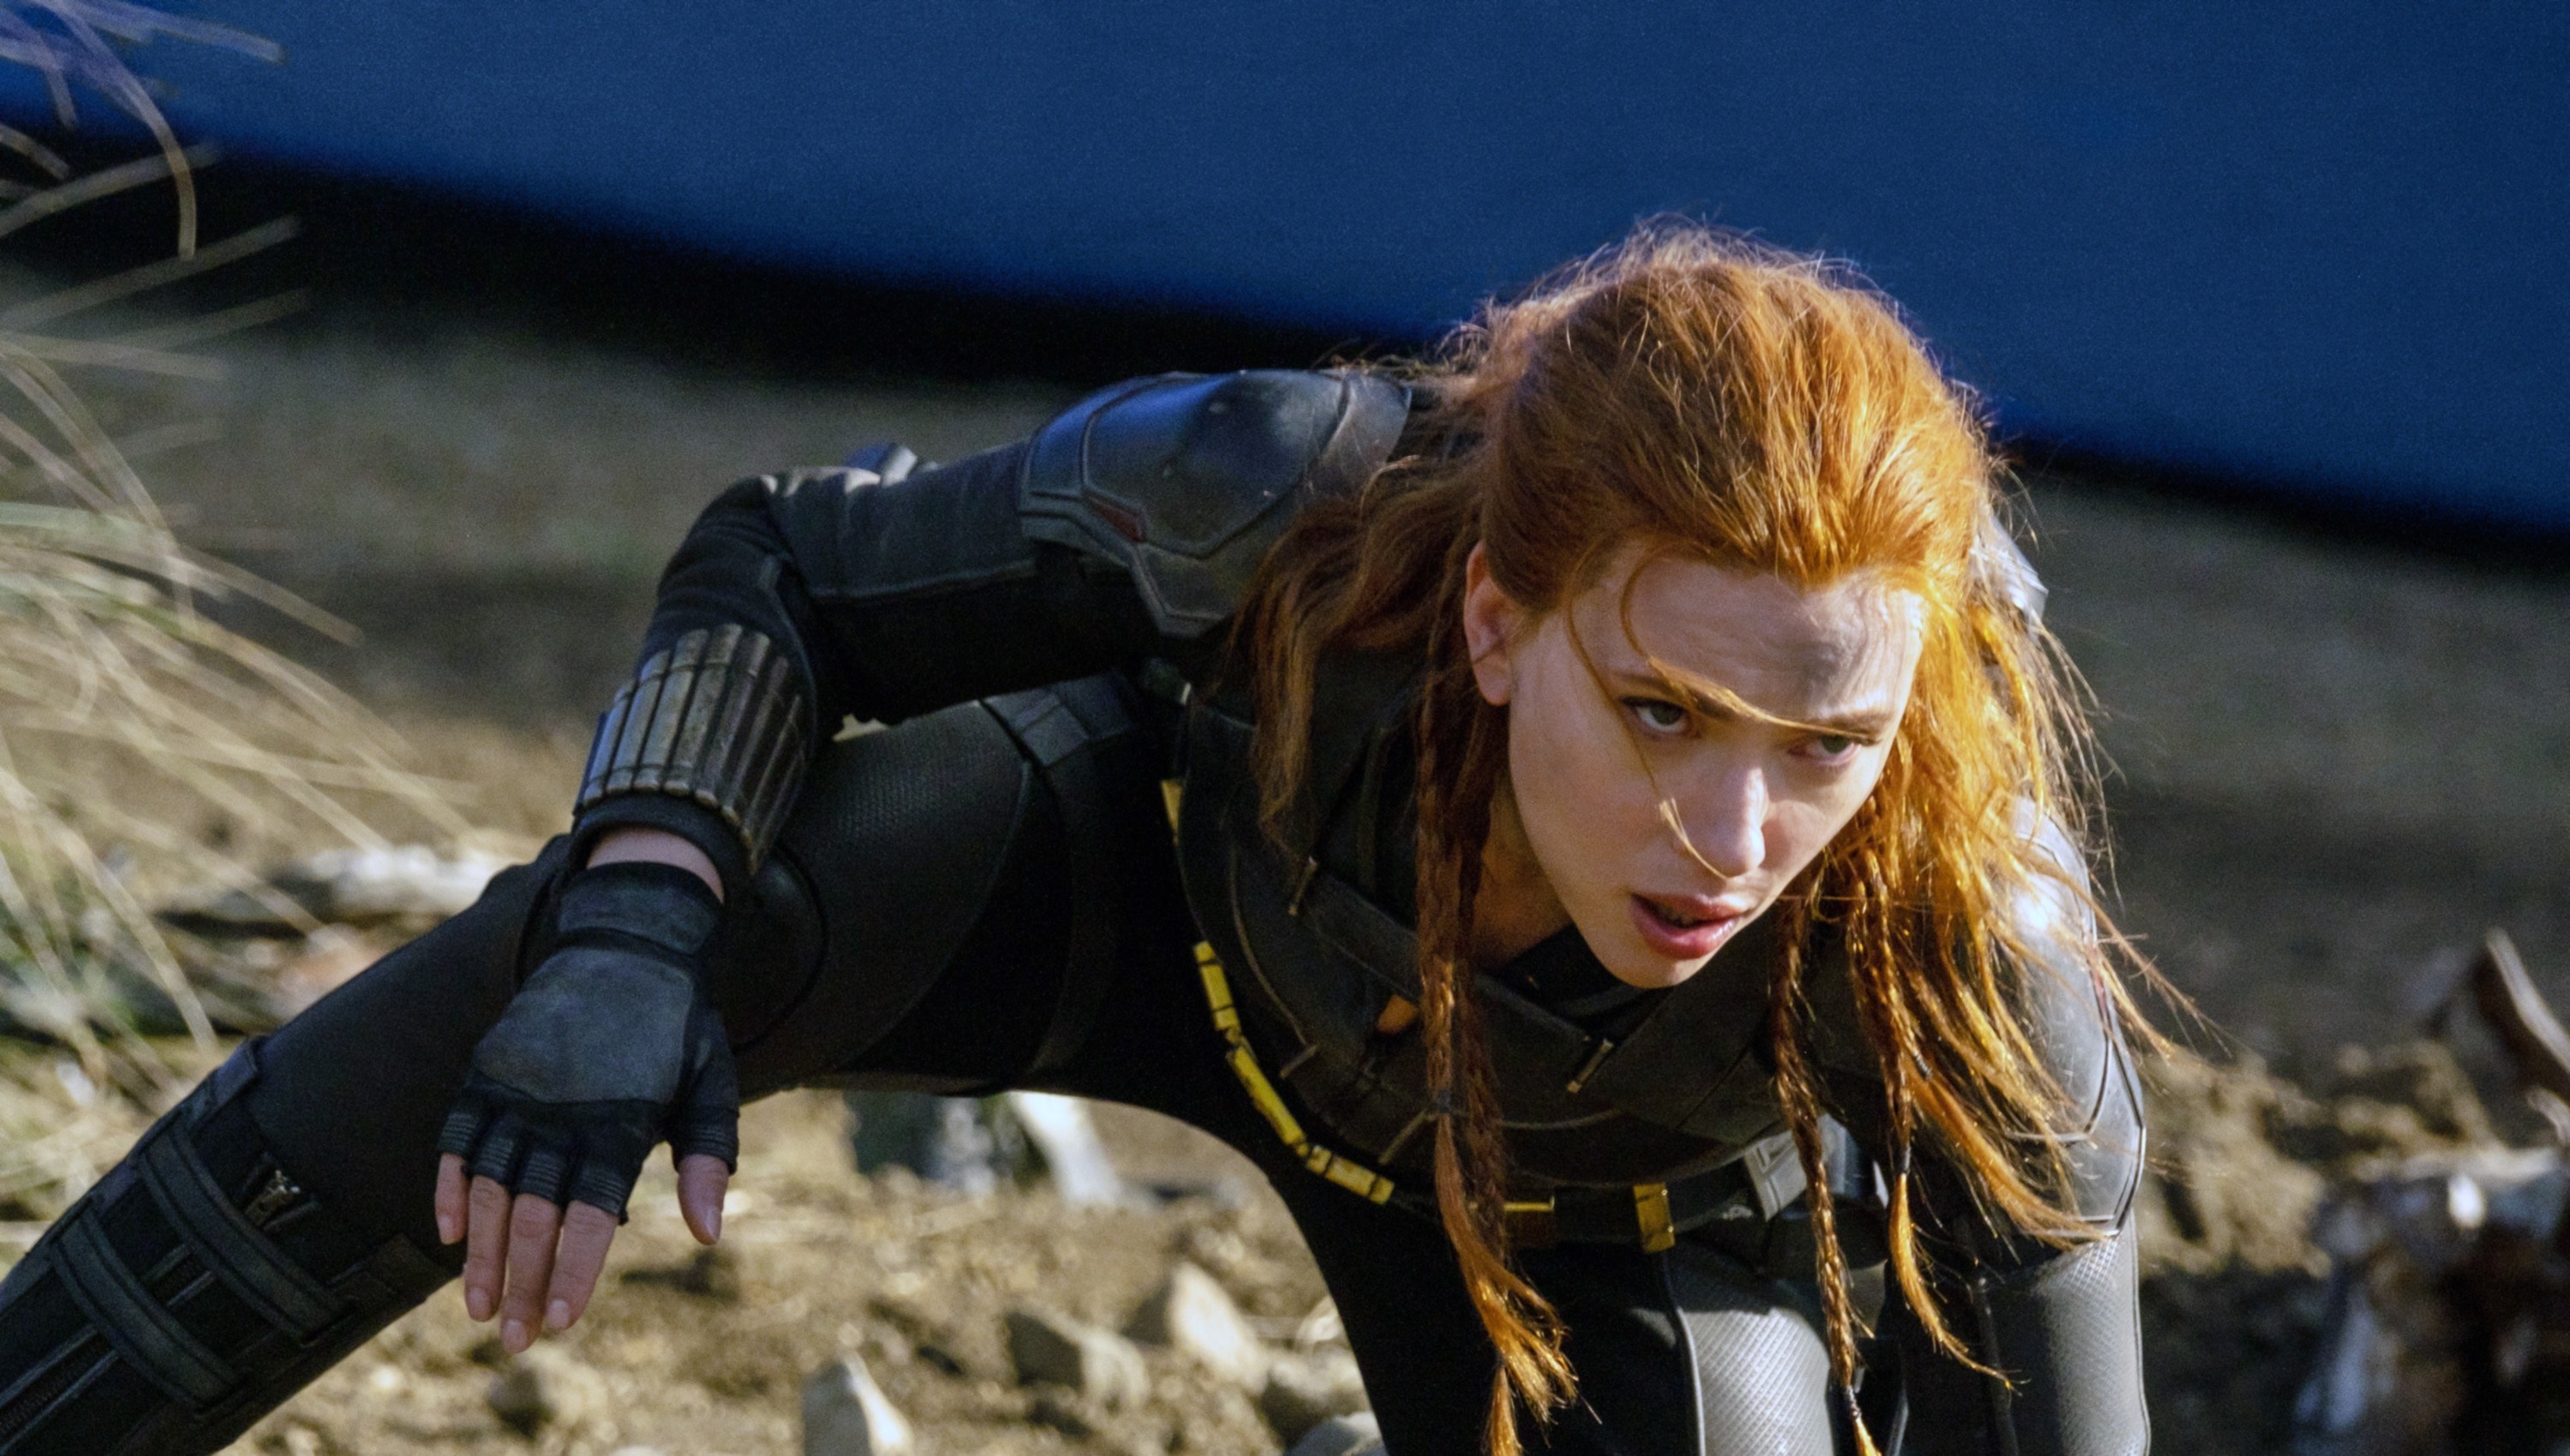 Black Widow wearing her newer outfit